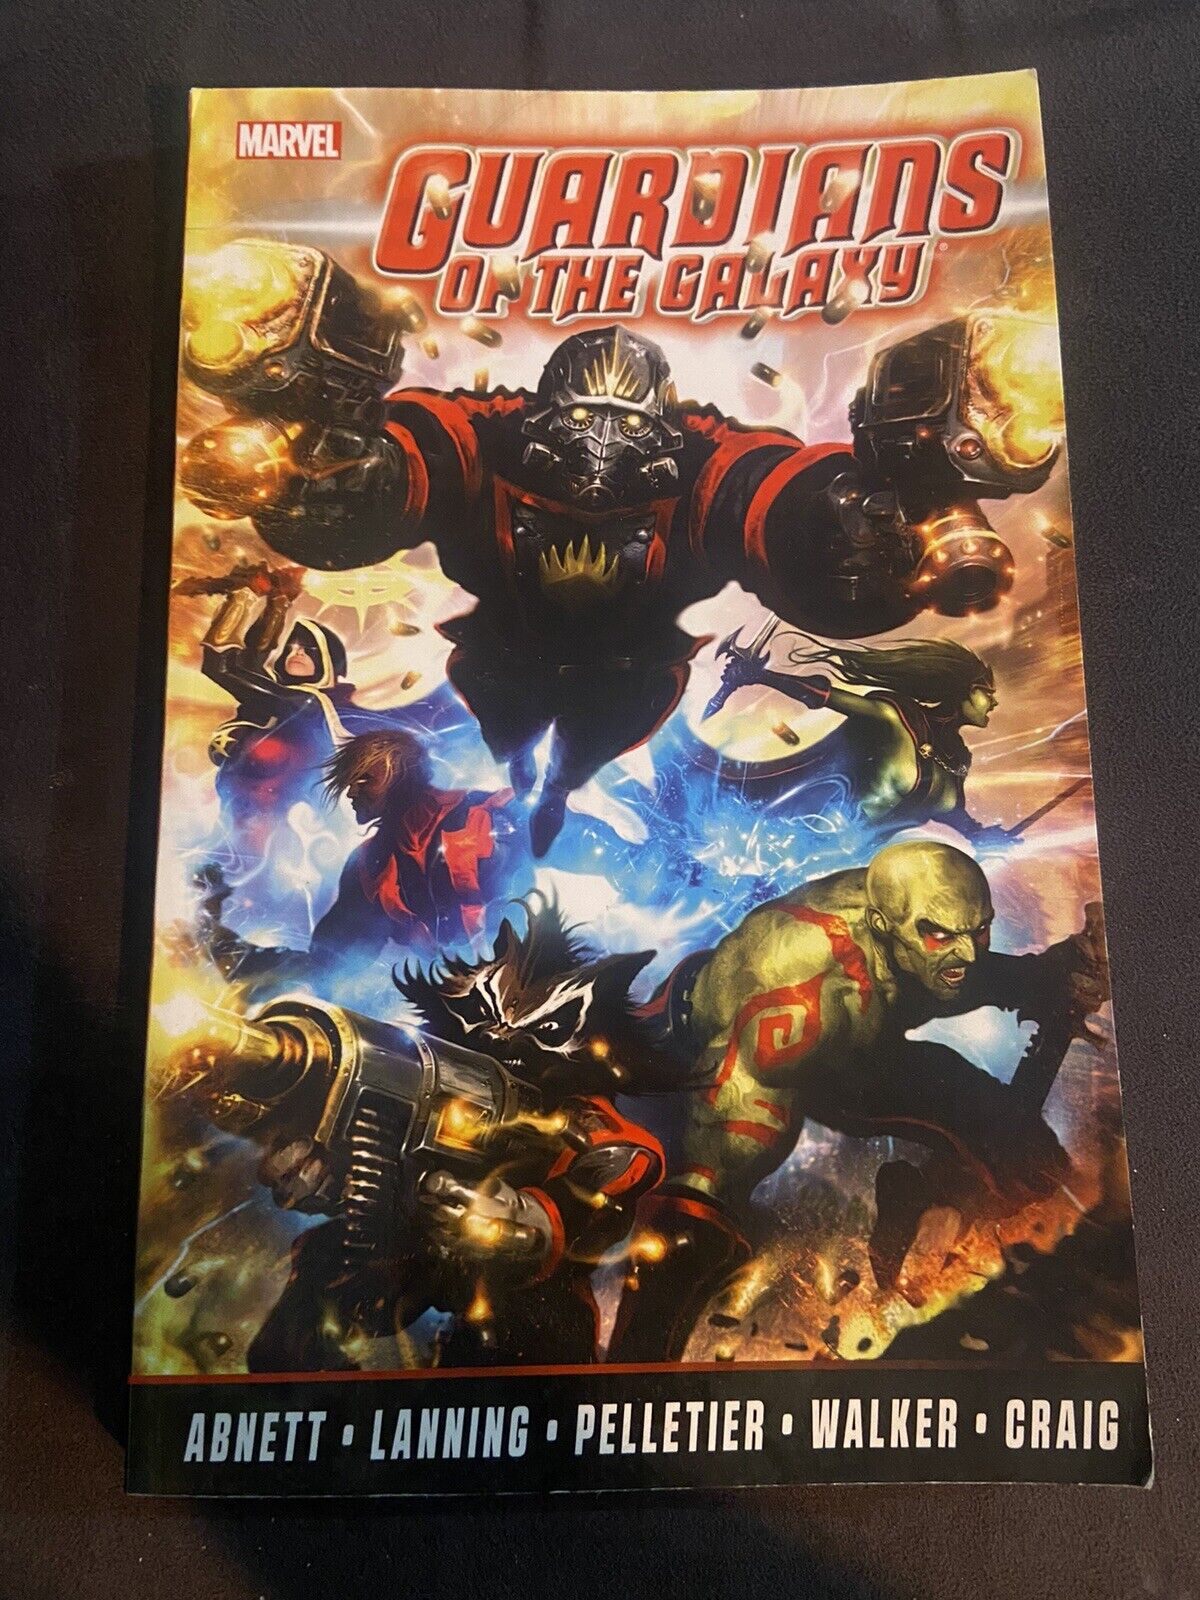 Guardians of the Galaxy by Abnett & Lanning: the Complete Collection #1 (Marvel